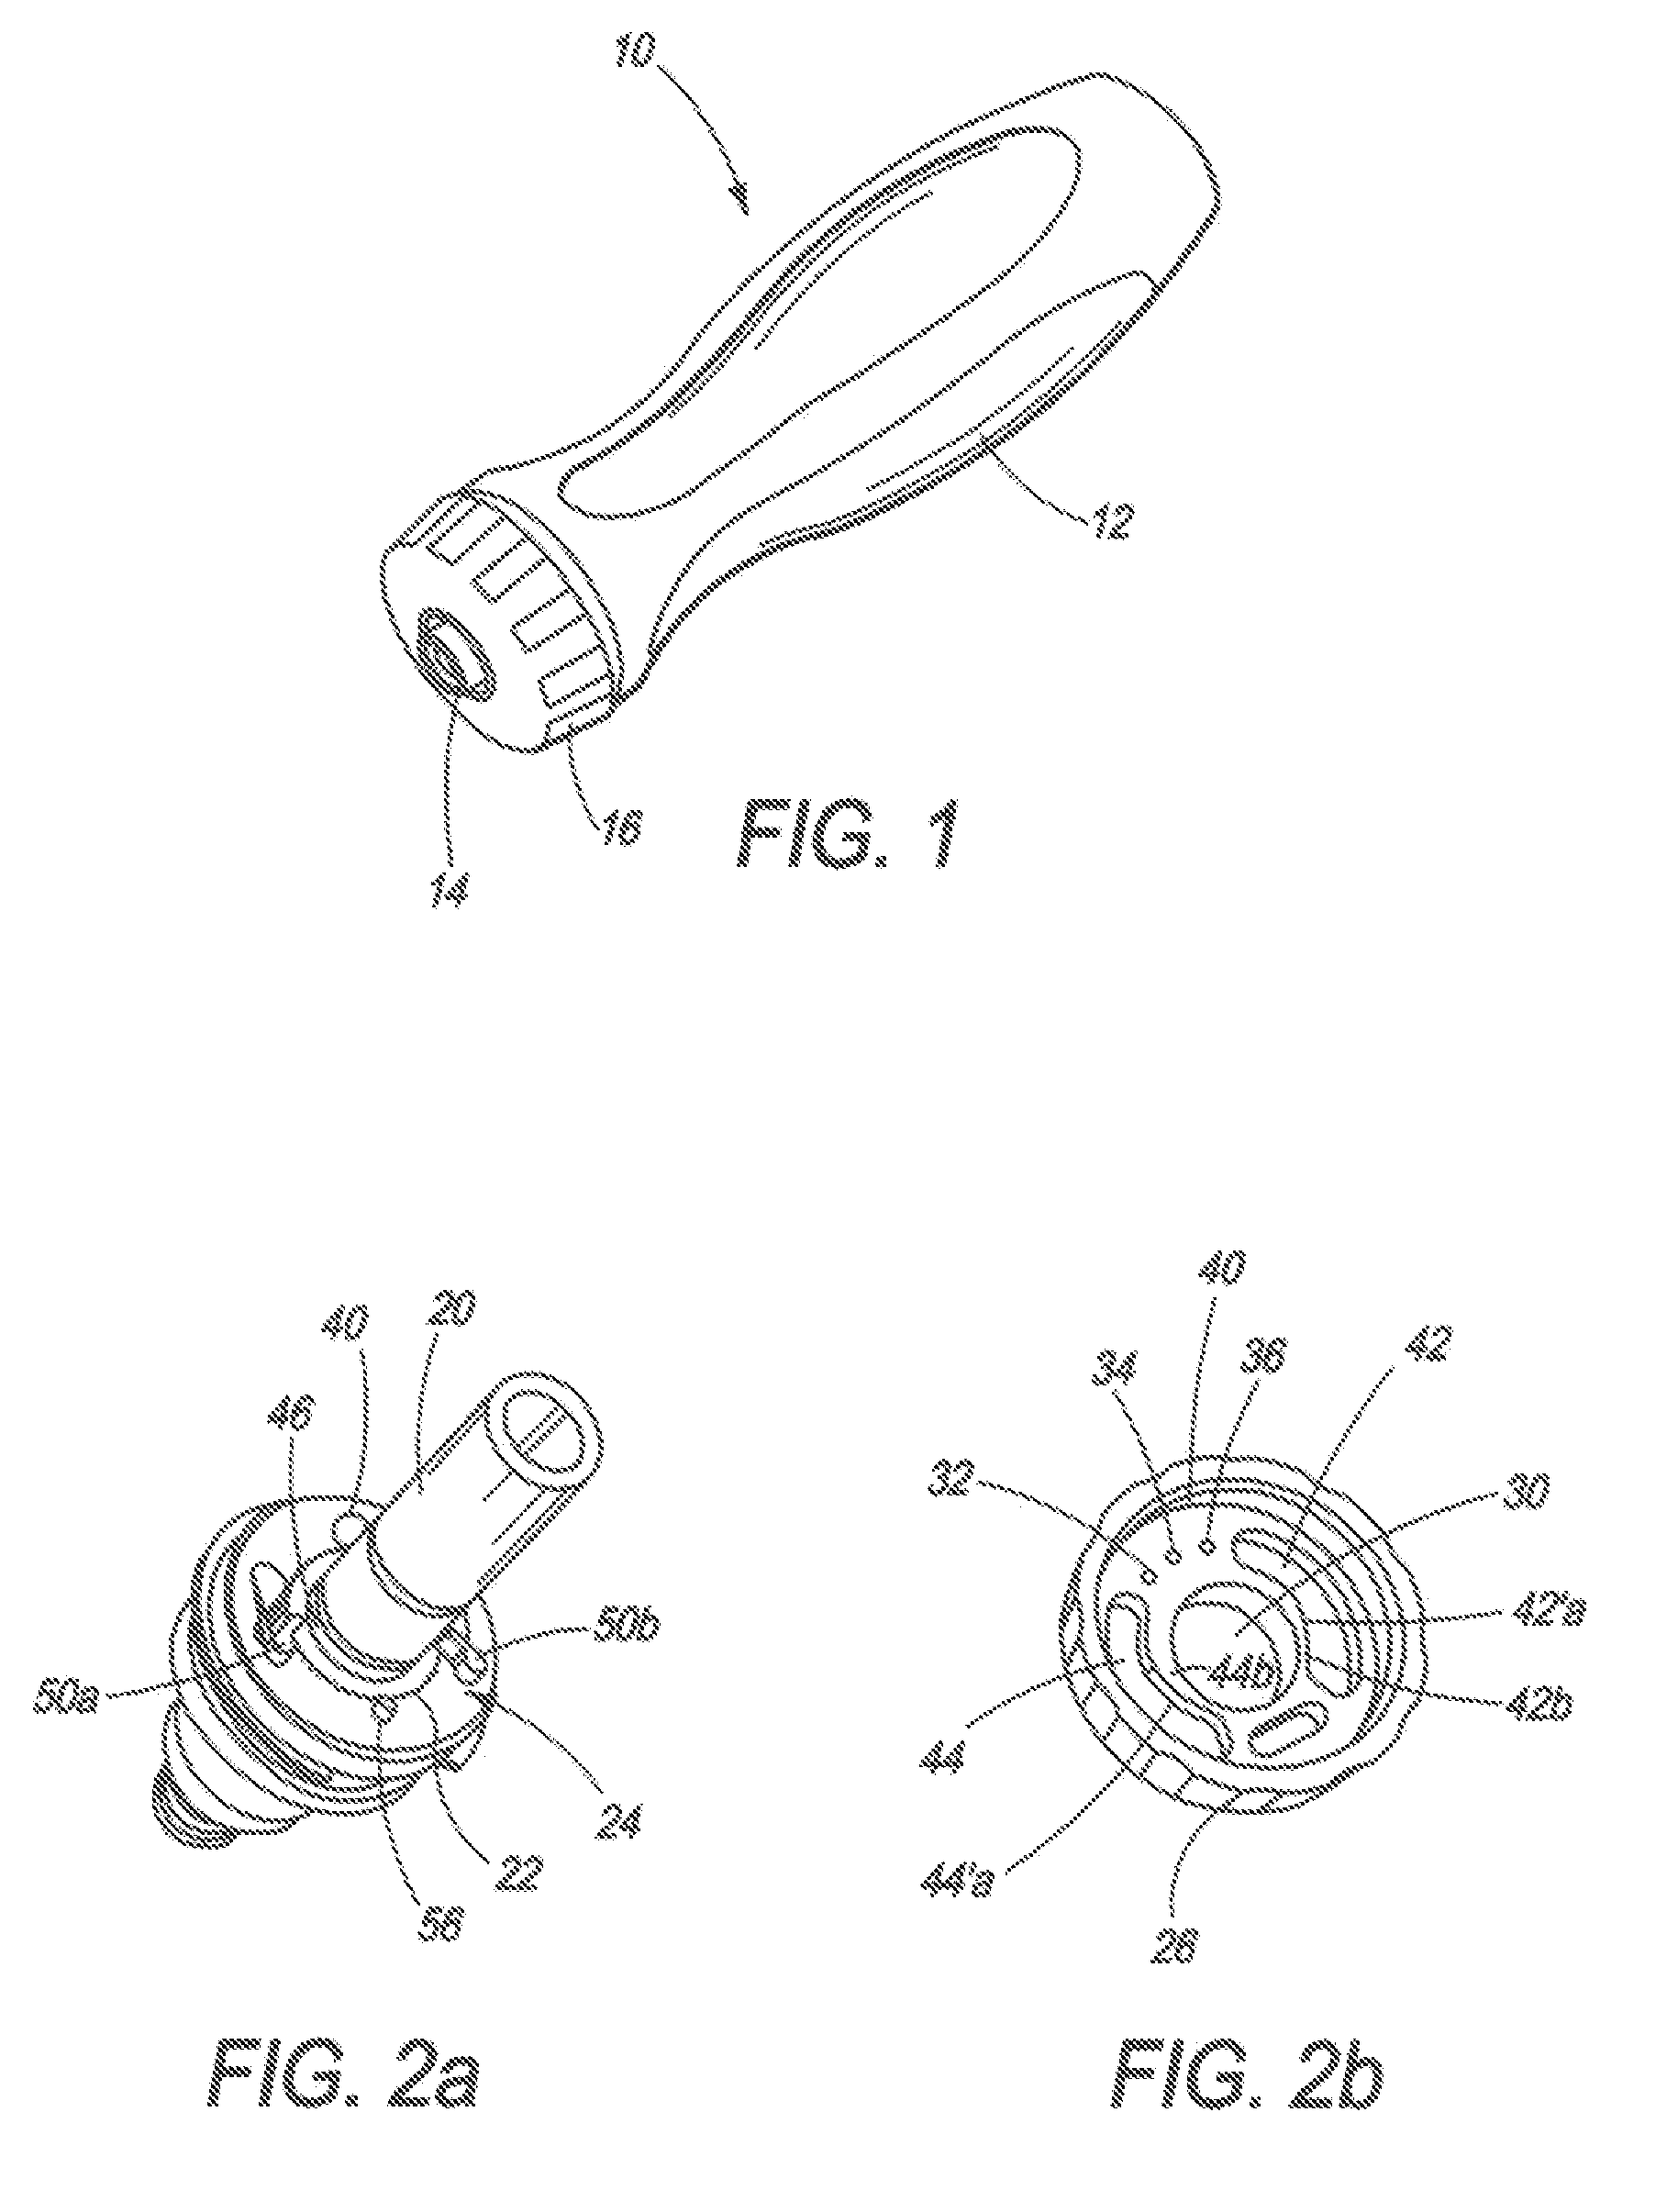 Coupling device with configurable actuator